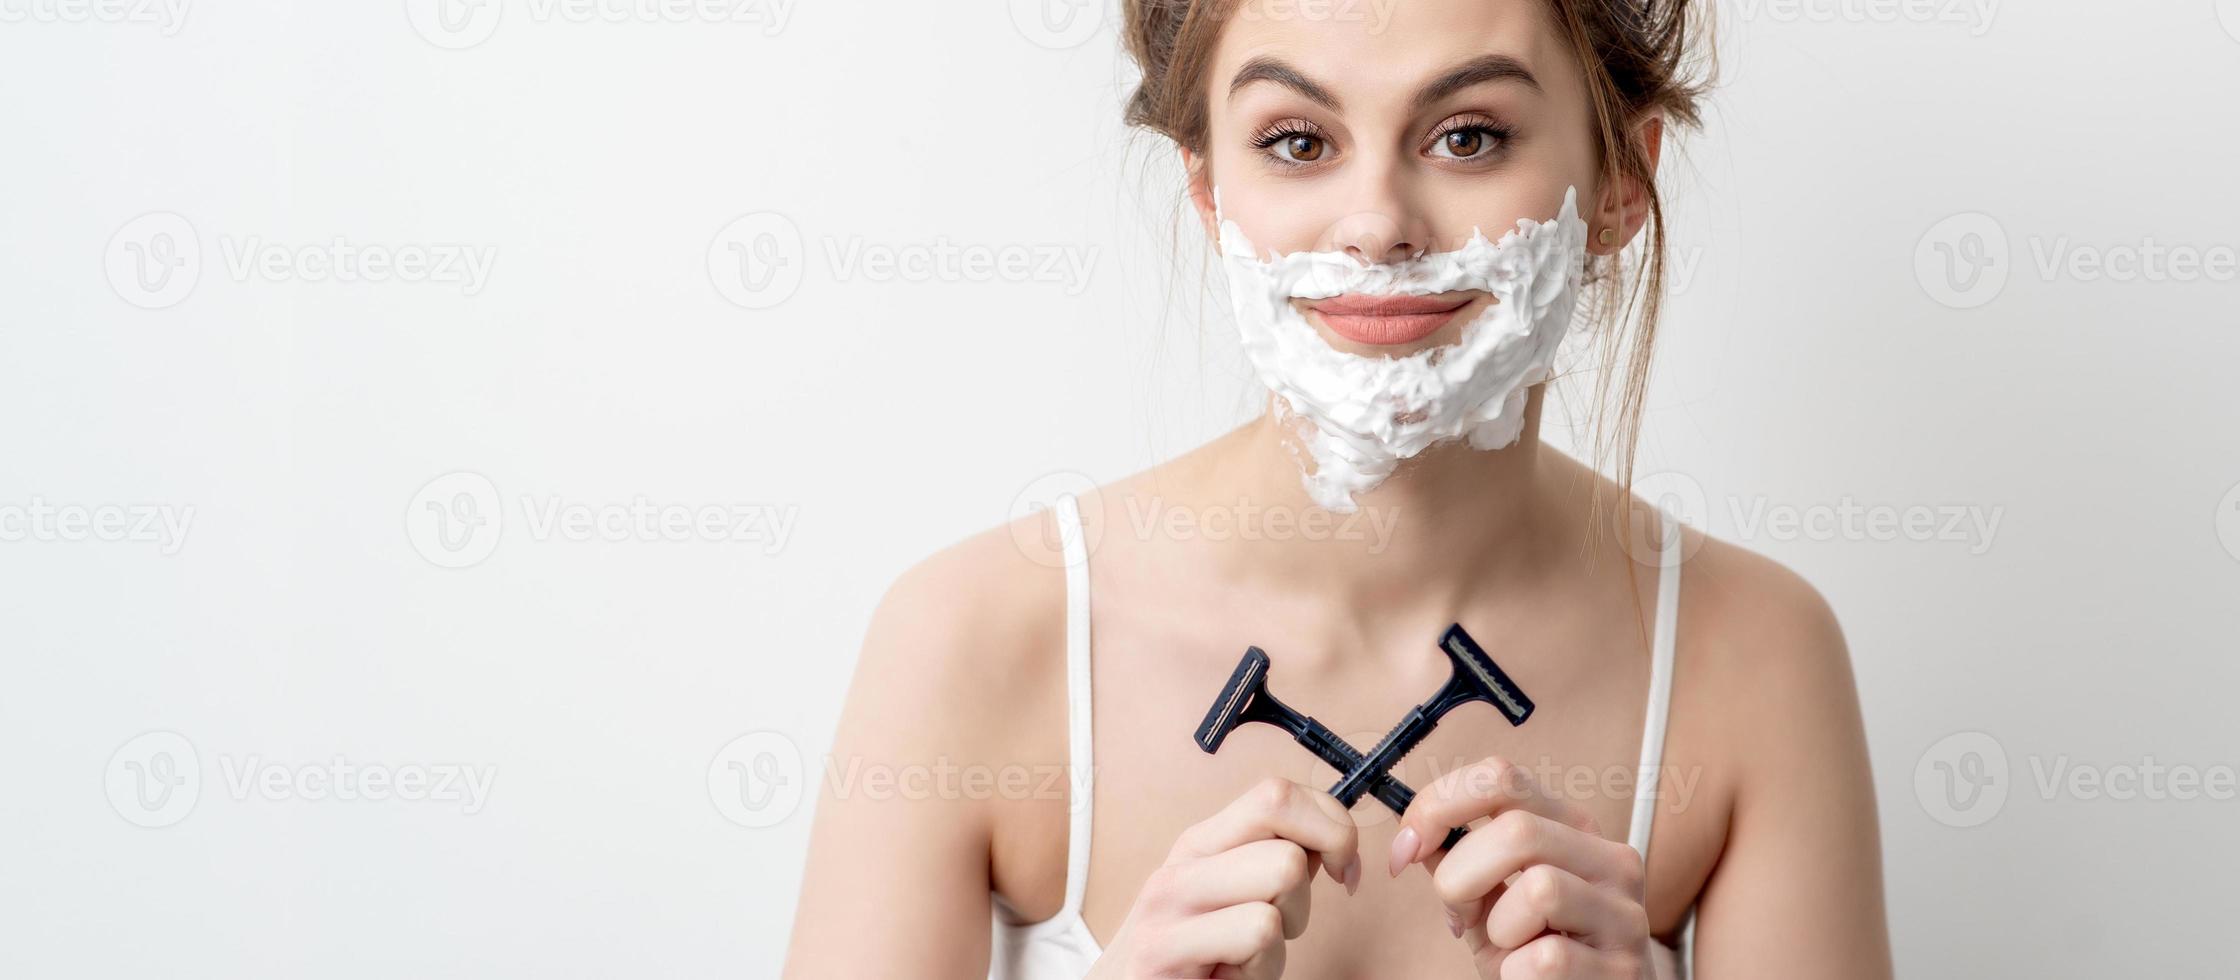 Woman with shaving foam on her face photo